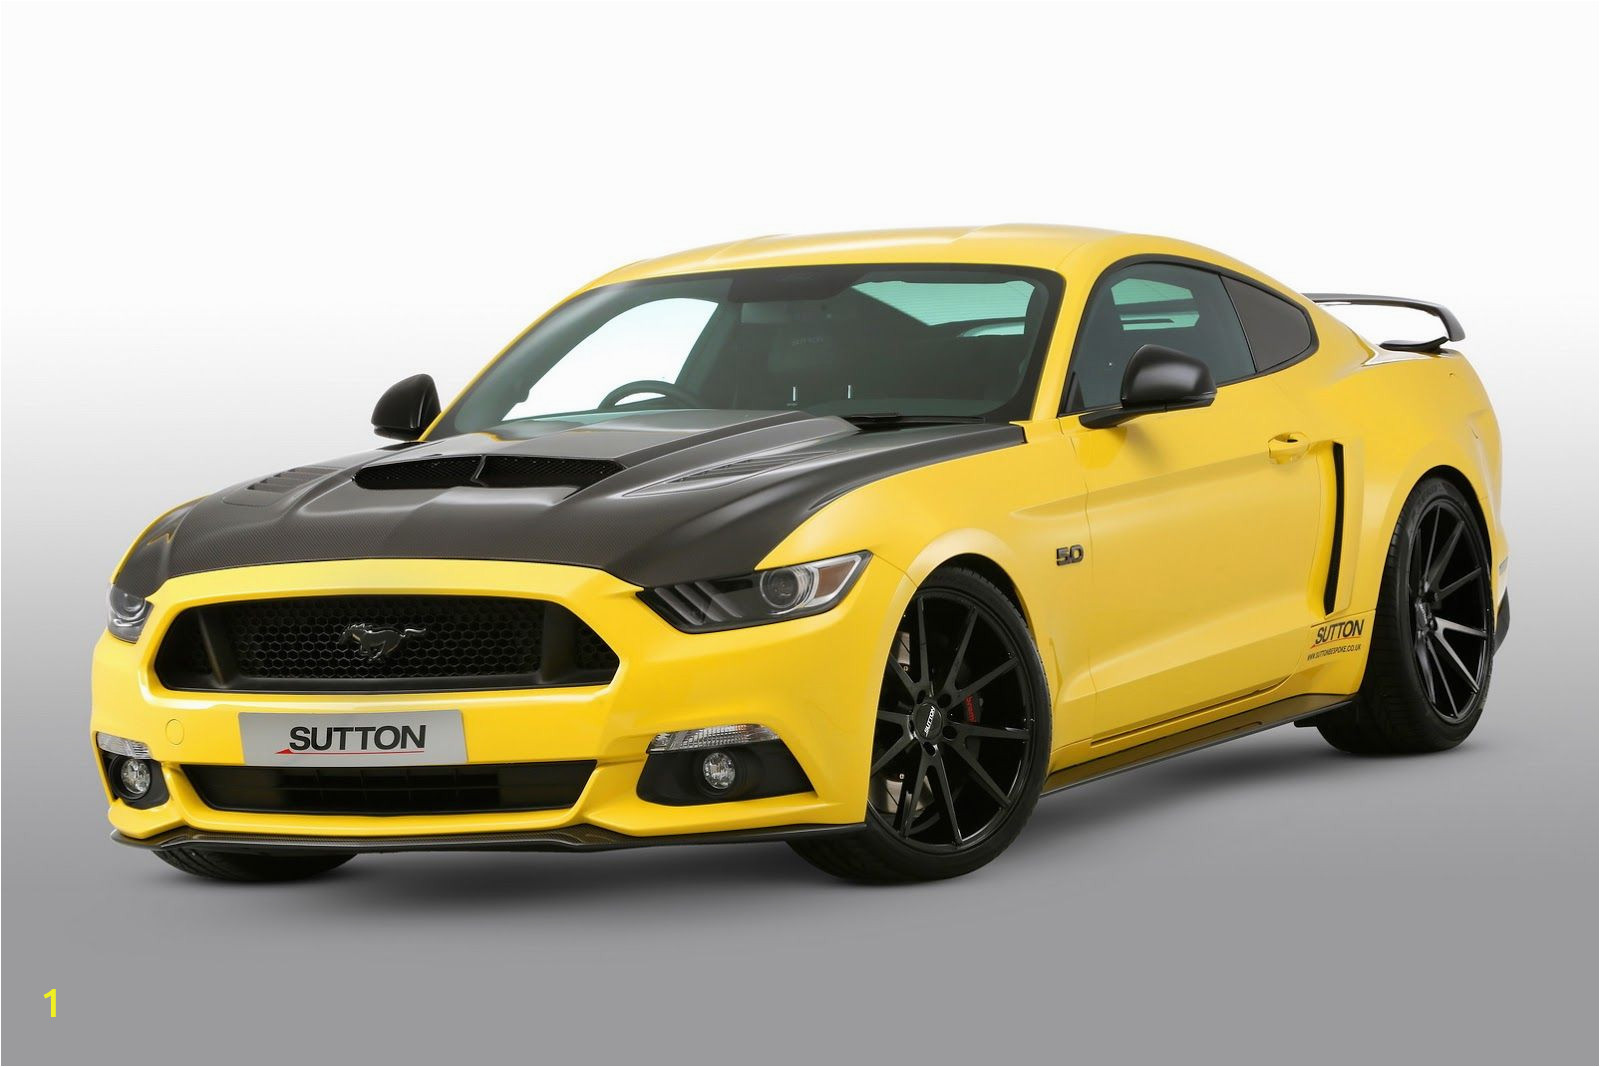 Ford Mustang Wall Mural Clive Sutton Launches Cs350 Cs500 & Cs700 Mustang Tuning